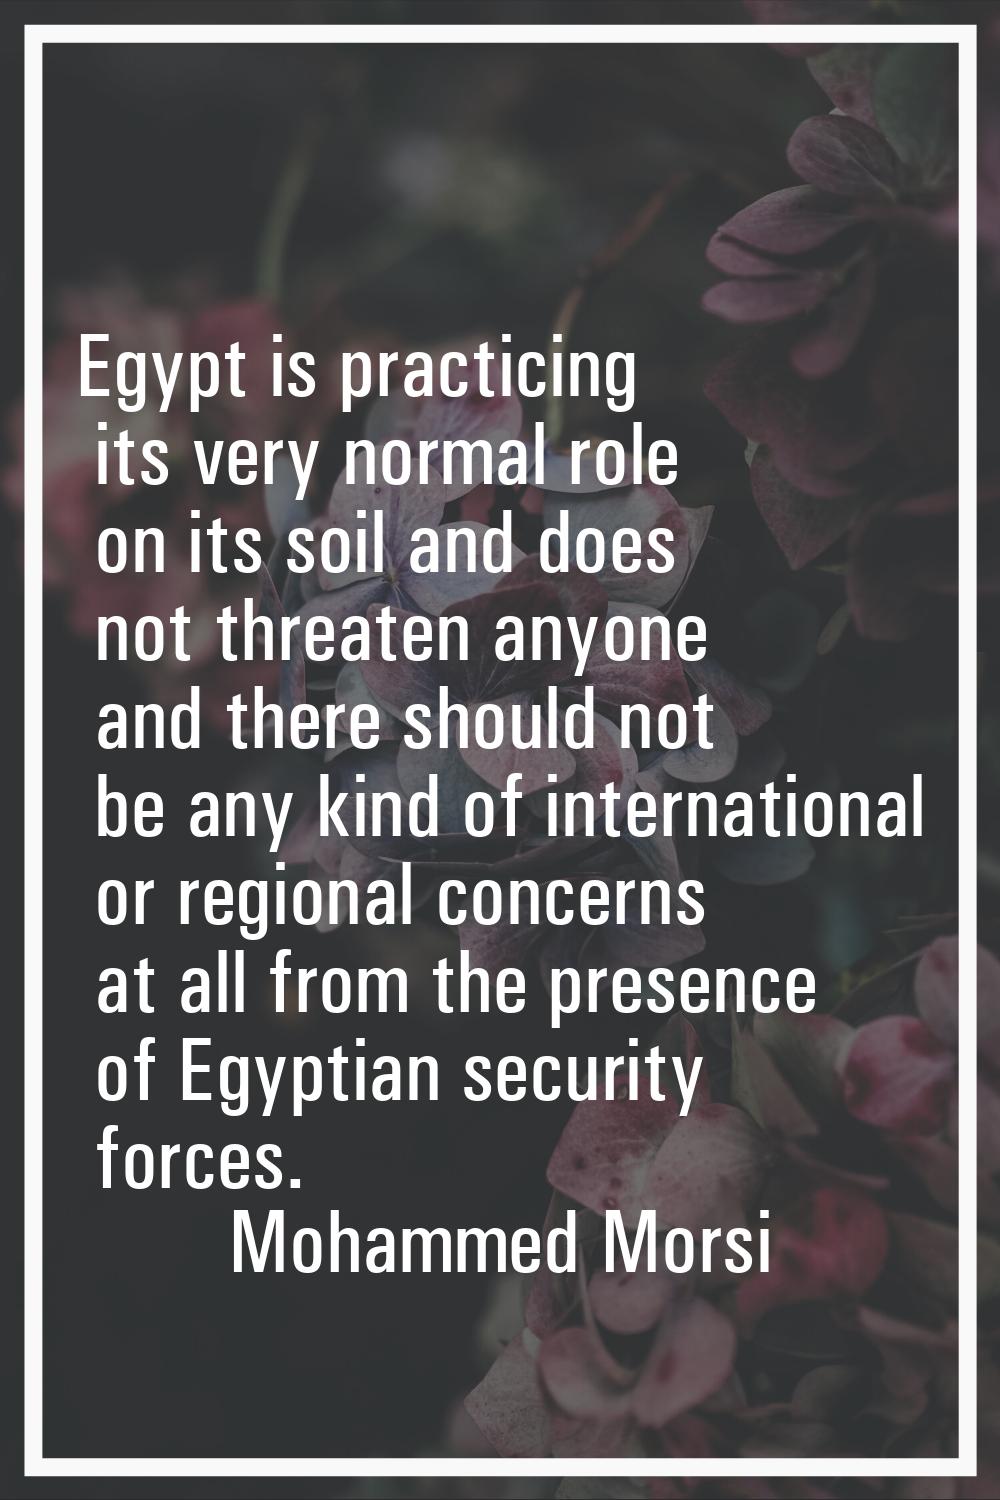 Egypt is practicing its very normal role on its soil and does not threaten anyone and there should 